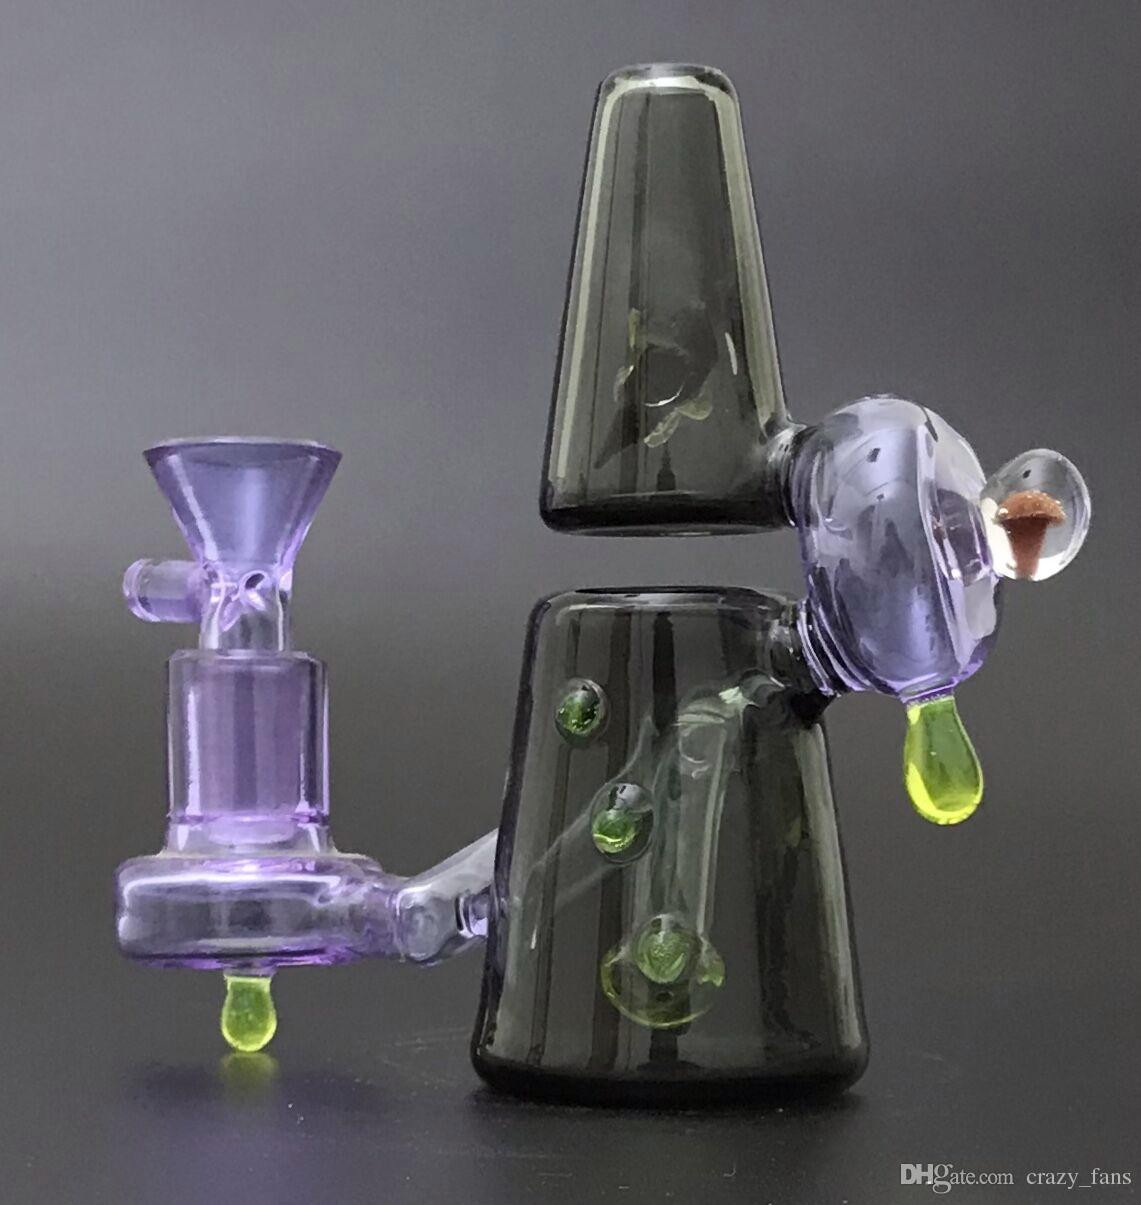 29 Recommended 5 Inch Glass Vase 2024 free download 5 inch glass vase of heady oil dab rigs 5 inch mini glass bong colorful bubbler unique throughout heady oil dab rigs 5 inch mini glass bong colorful bubbler unique water pipes 14mm female jo